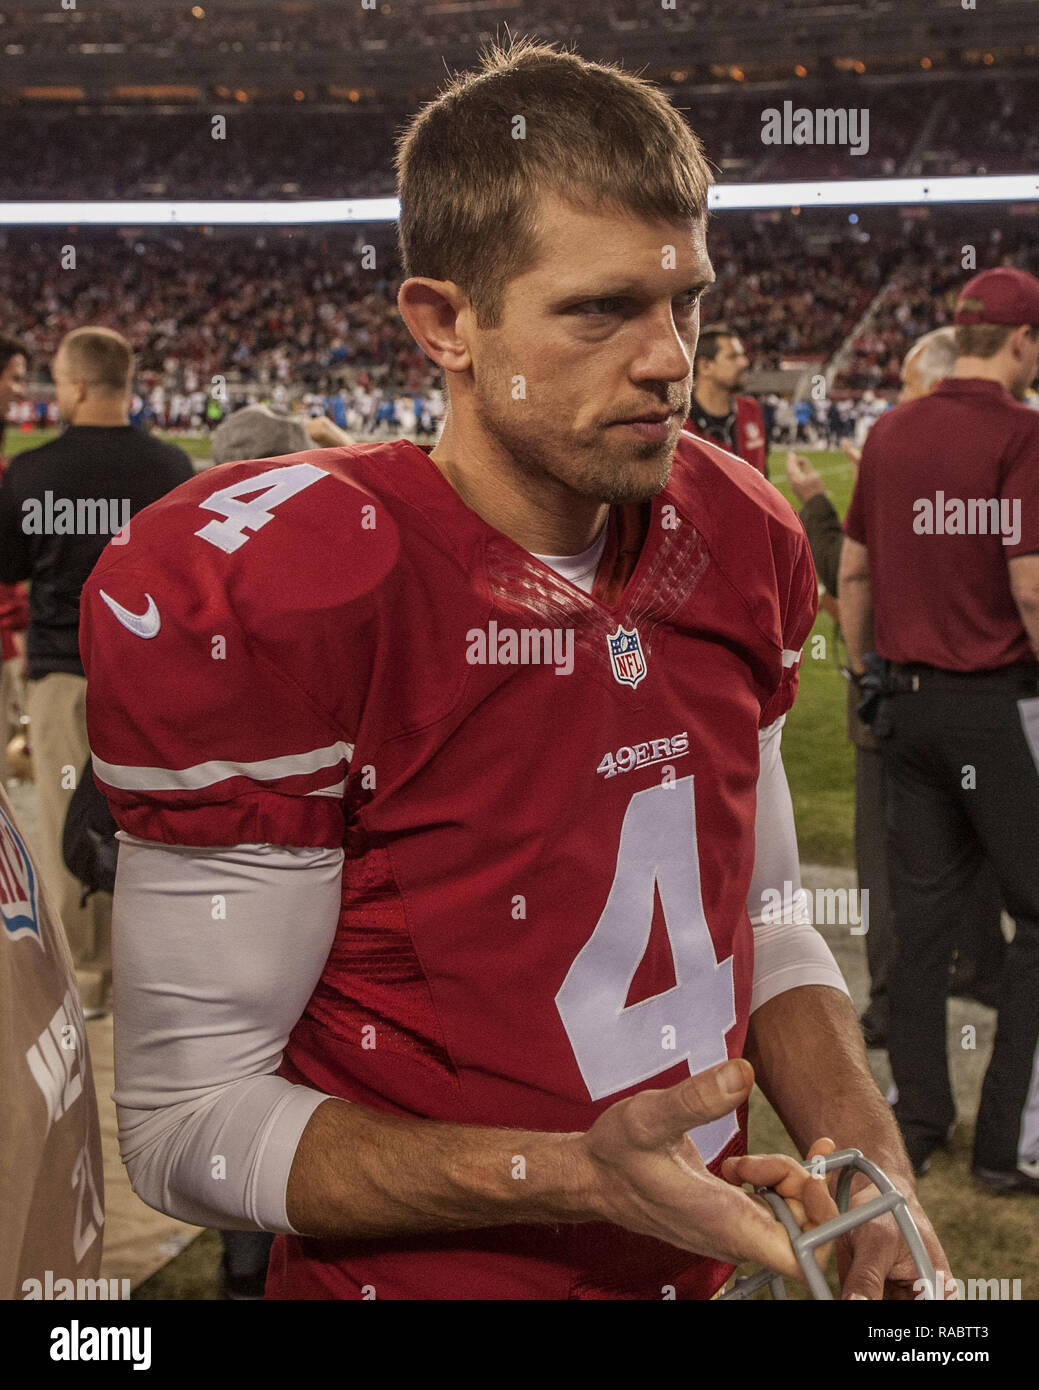 Santa Clara, California, USA. 20th Dec, 2014. San Francisco 49ers punter Andy Lee (4) on Saturday, December 20, 2014, at Levis Stadium in Santa Clara, California. The Chargers defeated the 49ers 38-35 in overtime. Credit: Al Golub/ZUMA Wire/Alamy Live News Stock Photo